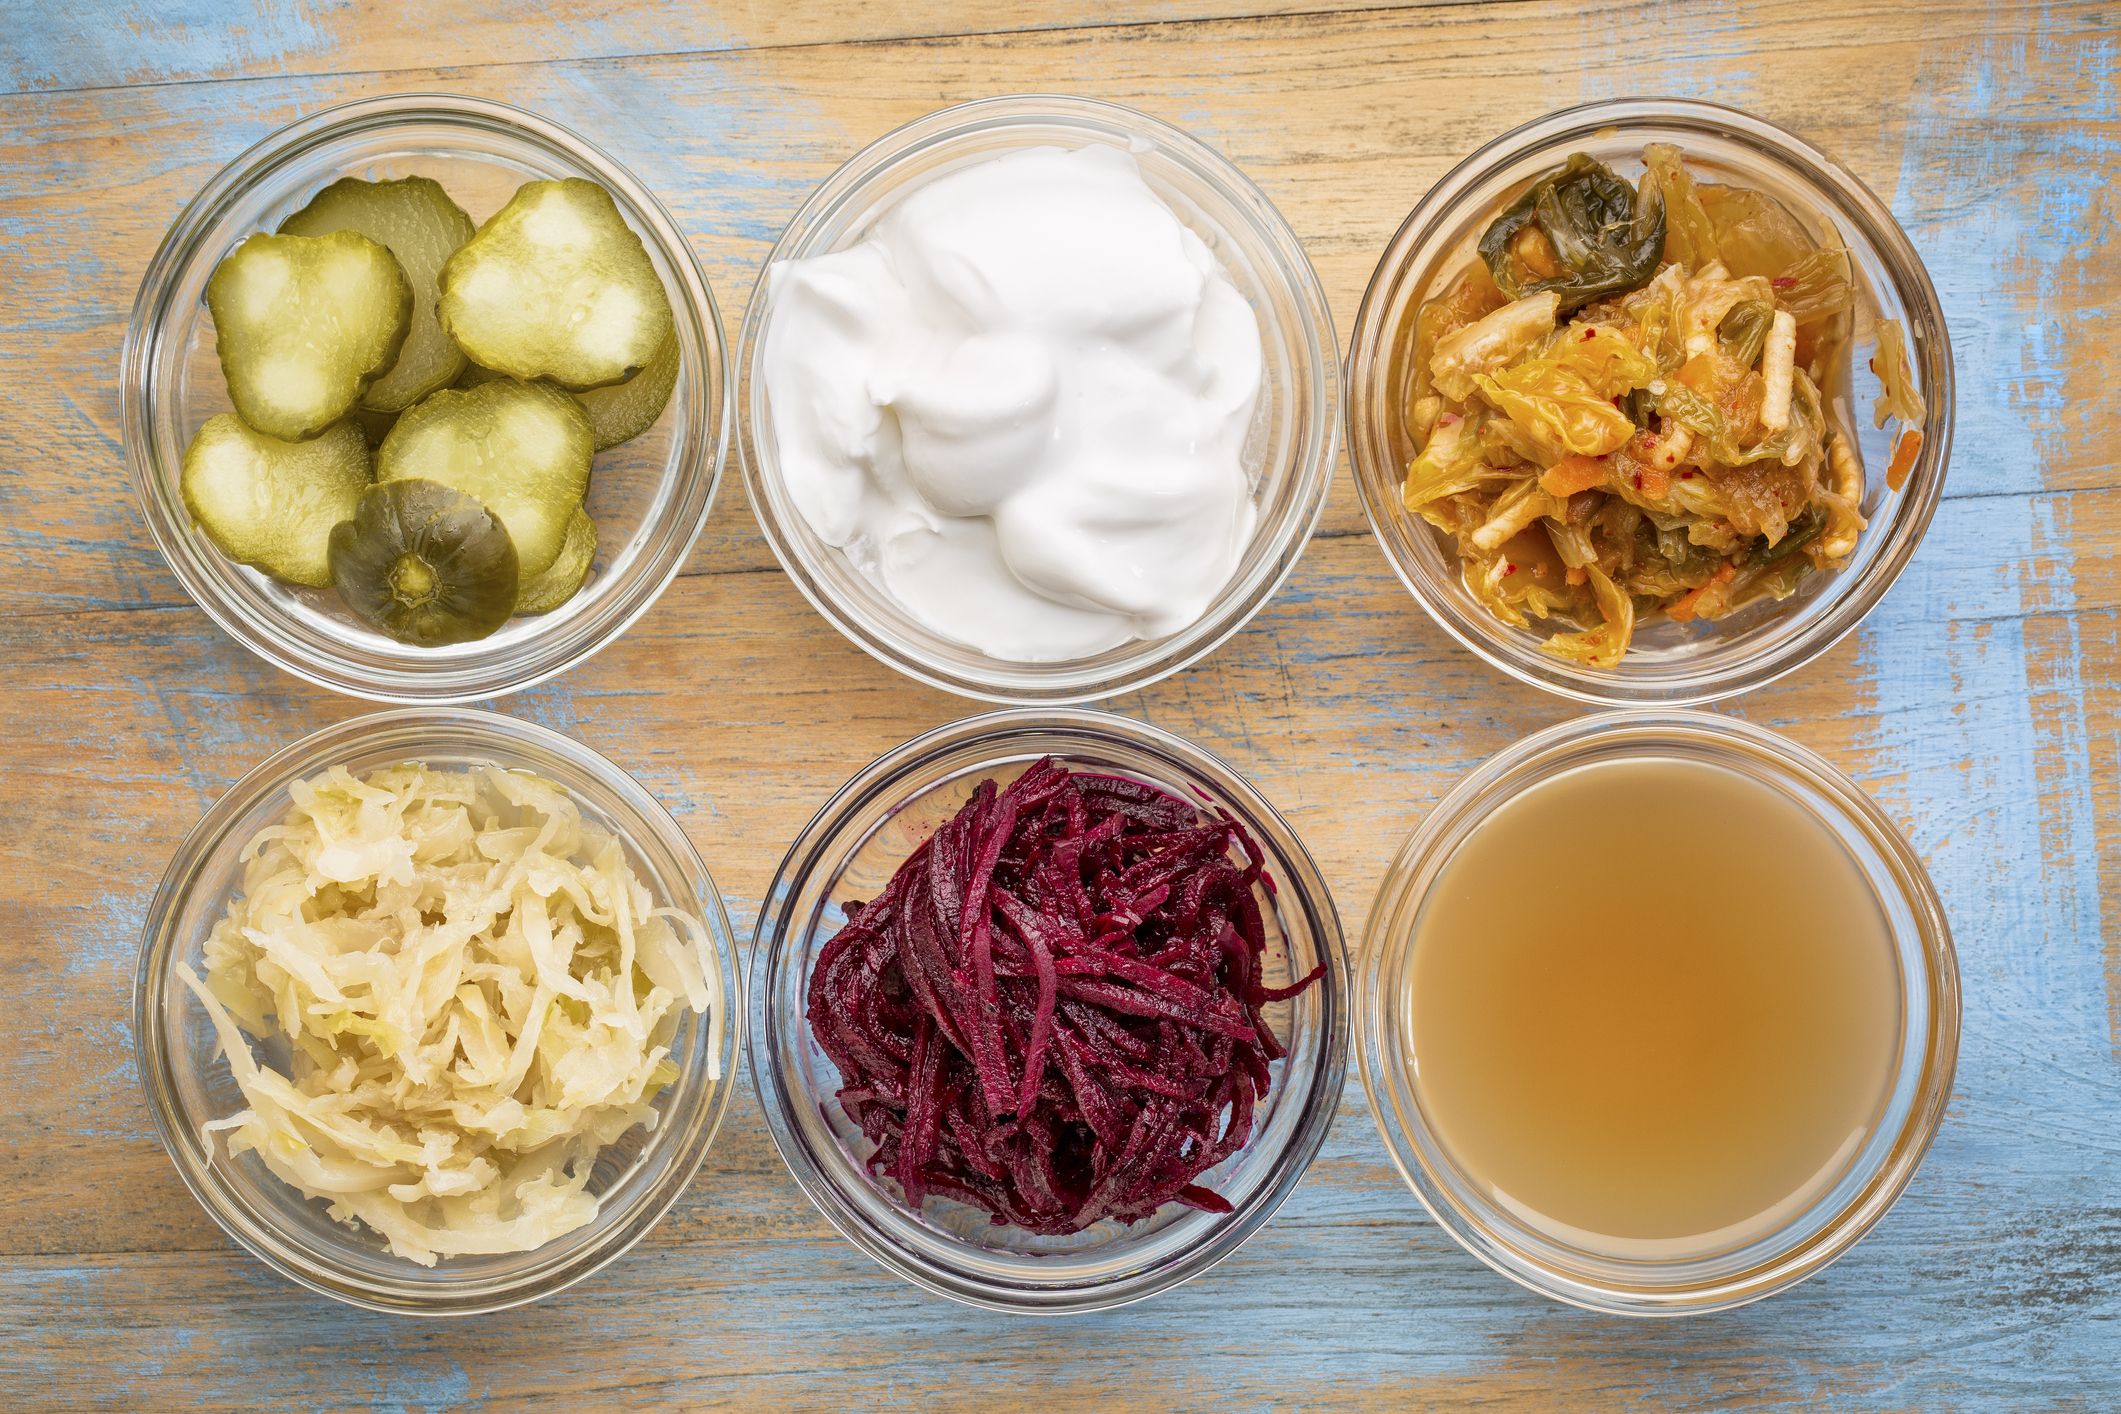 fermented food collection royalty free image 607470078